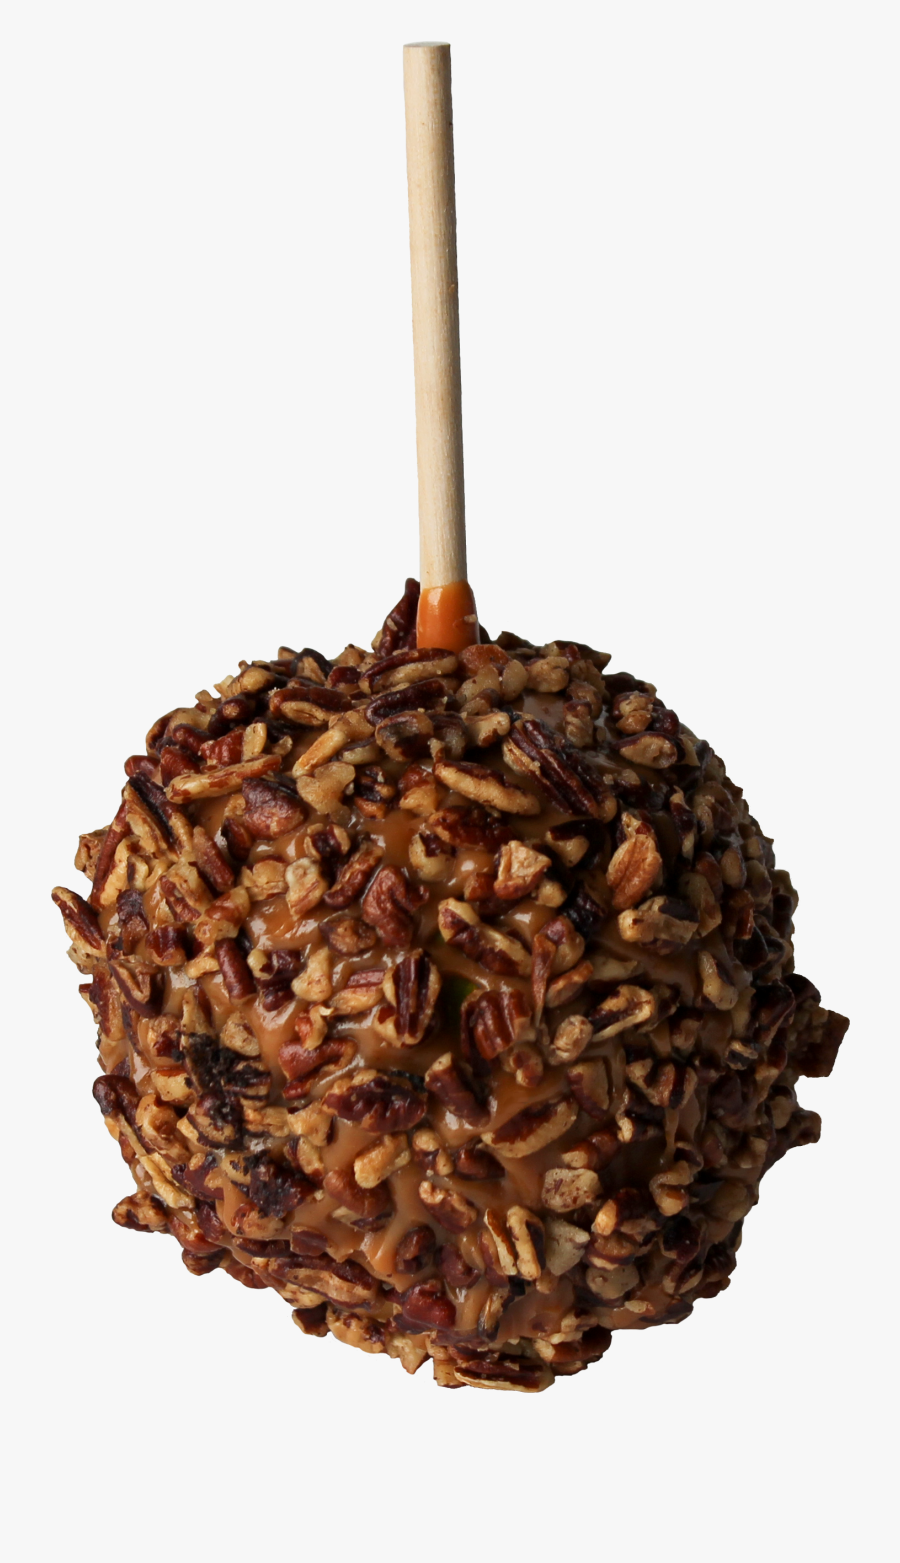 Candy Apples Png, Transparent Clipart